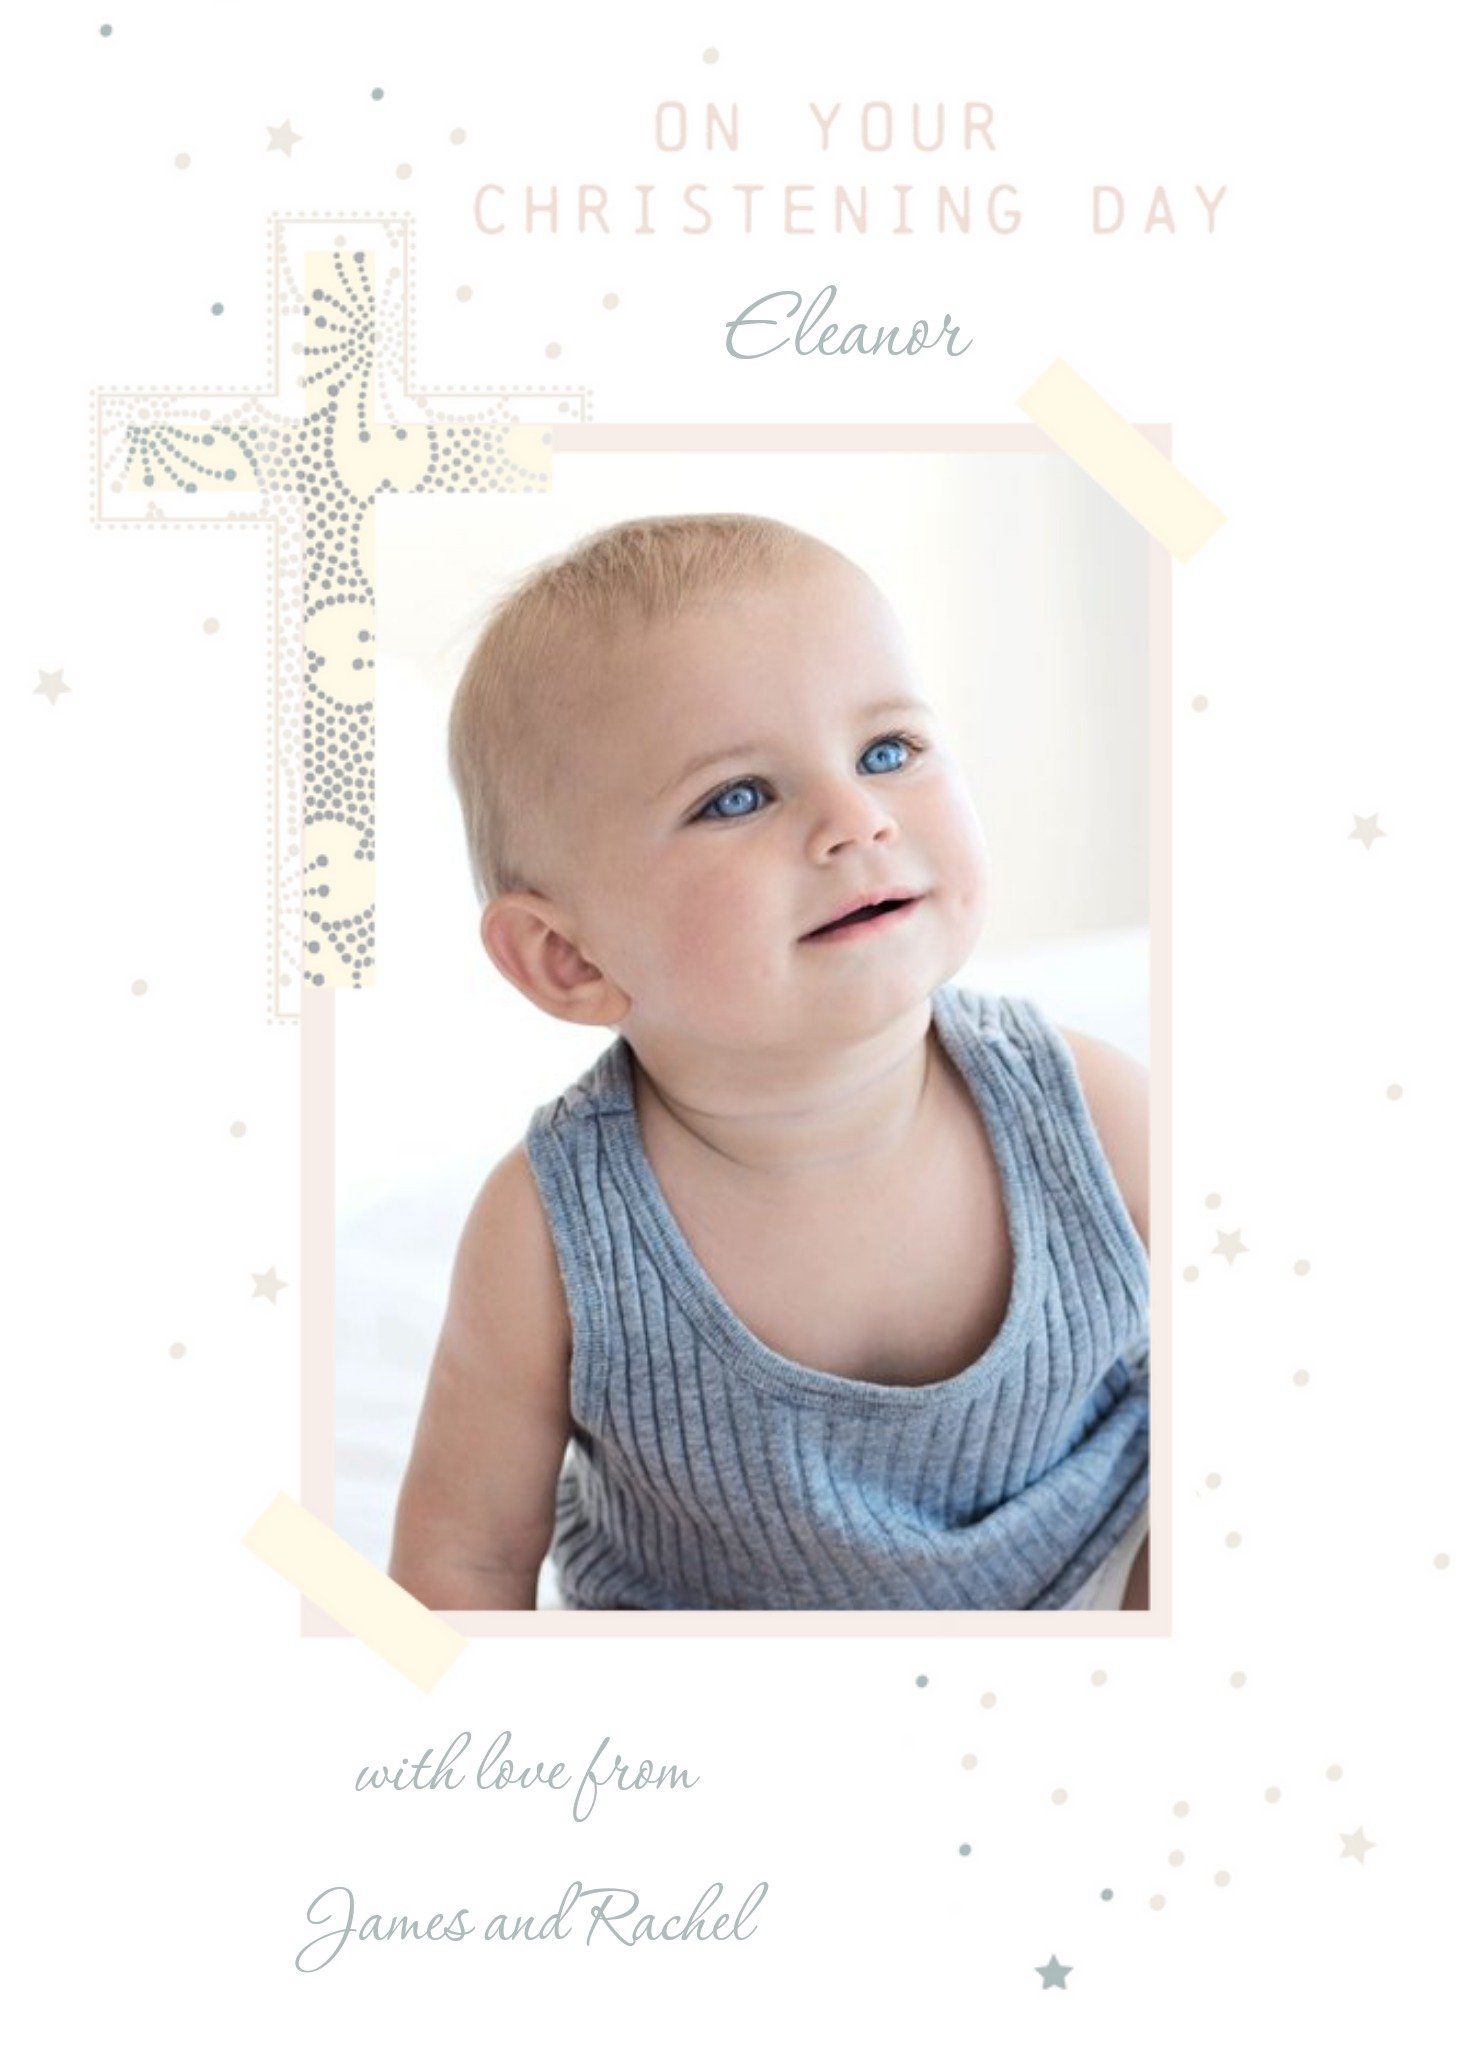 Ling Design Christian Cross With A Floral Pattern Christening Day Photo Upload Card Ecard